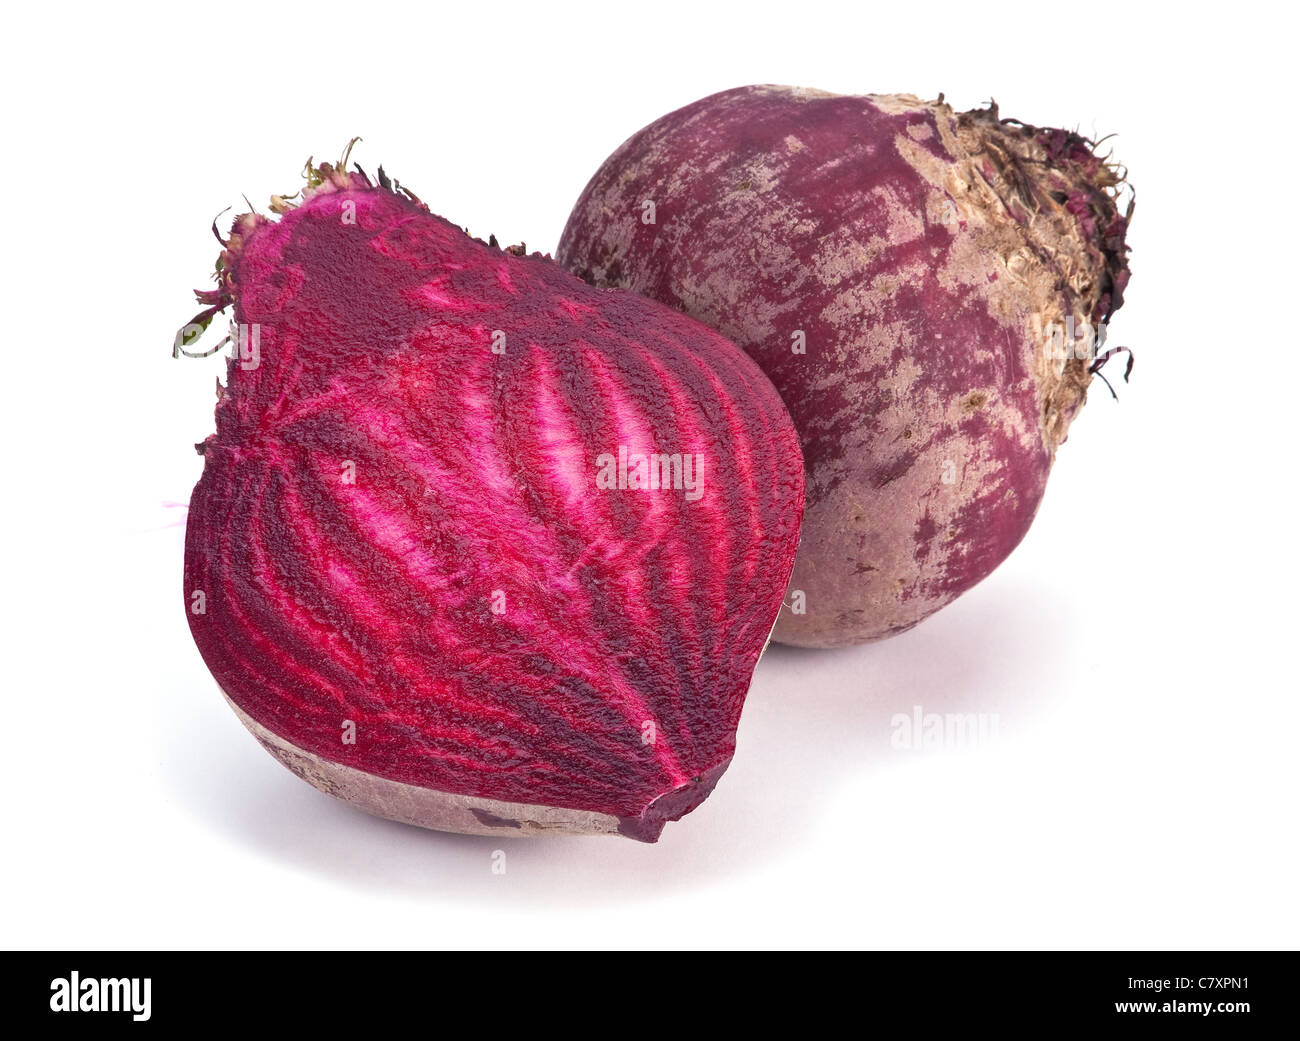 Ripe bet root vegetable isolated on white Stock Photo